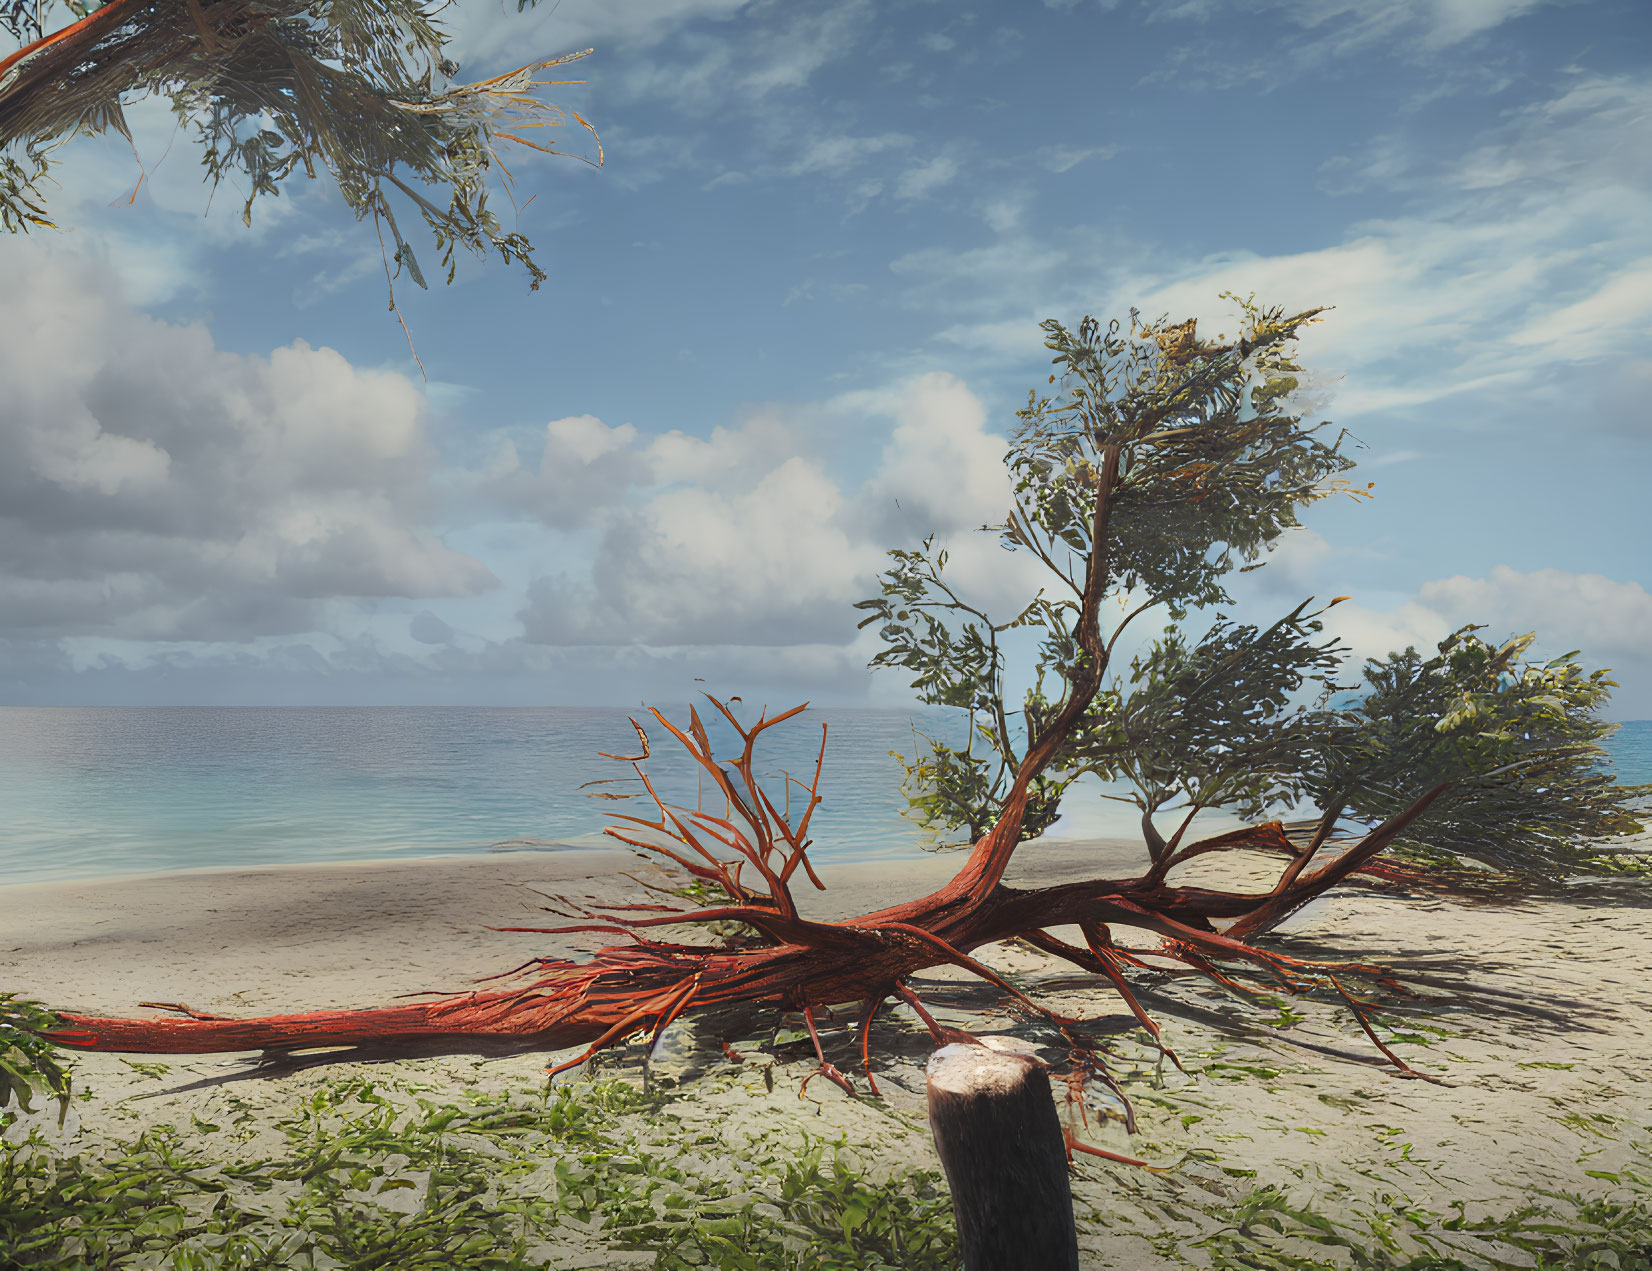 Unique red-rooted tree on sandy beach with calm ocean waters and clear blue sky